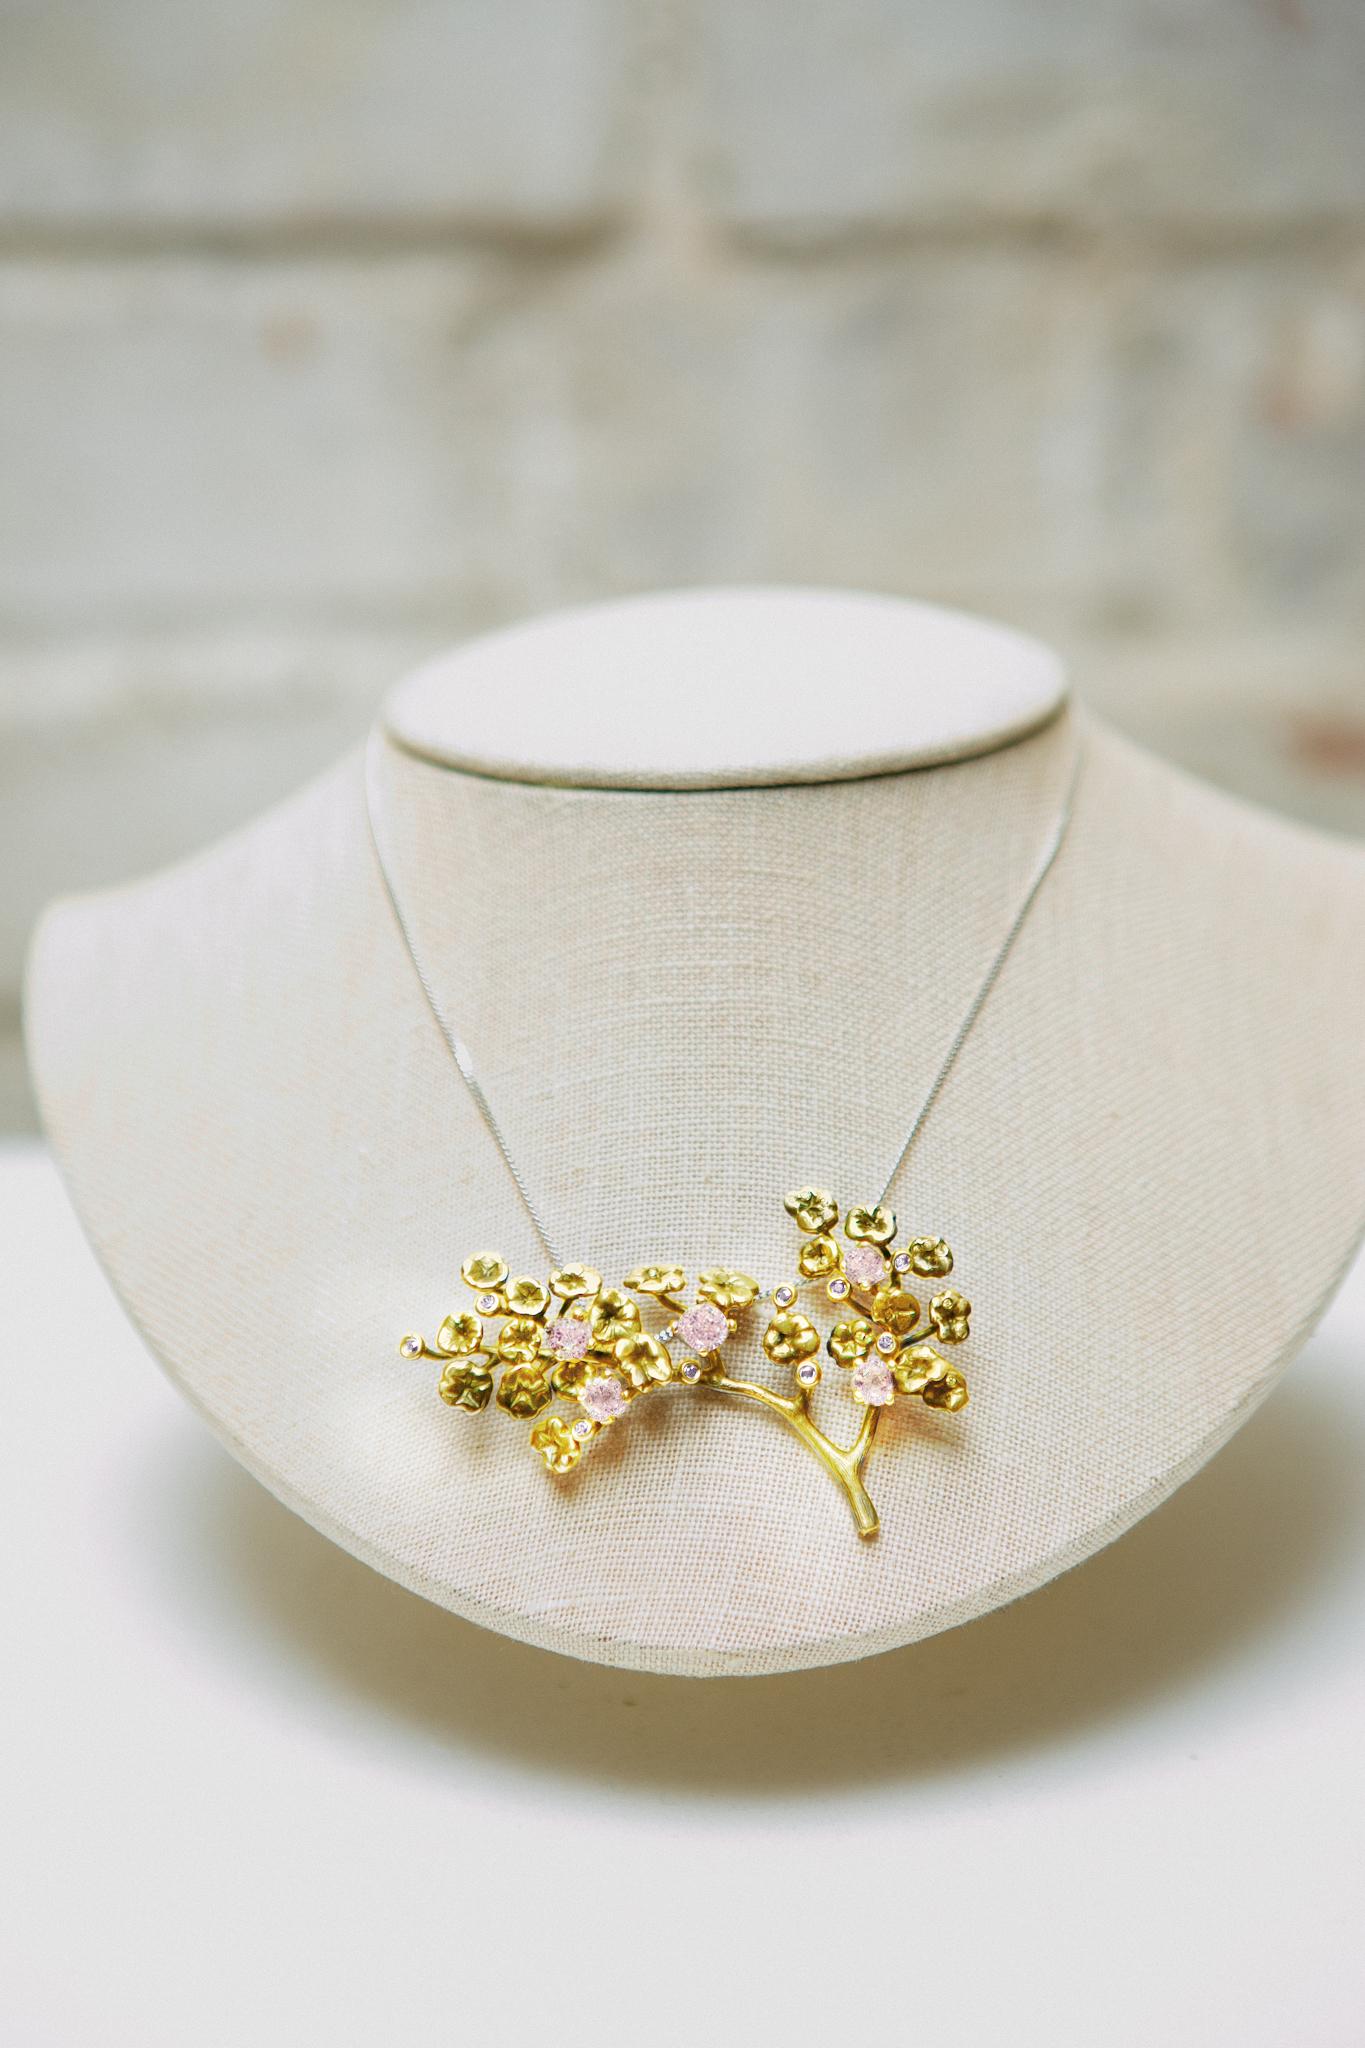 This 2.75 inch long 18 karat yellow gold Heliotrope necklace is a great match of fancy light purplish pink iced crush diamonds (40 diamonds, 5.05 Carats in total) and the tenderness of the summer golden flowers.
The jewelry art objects can be